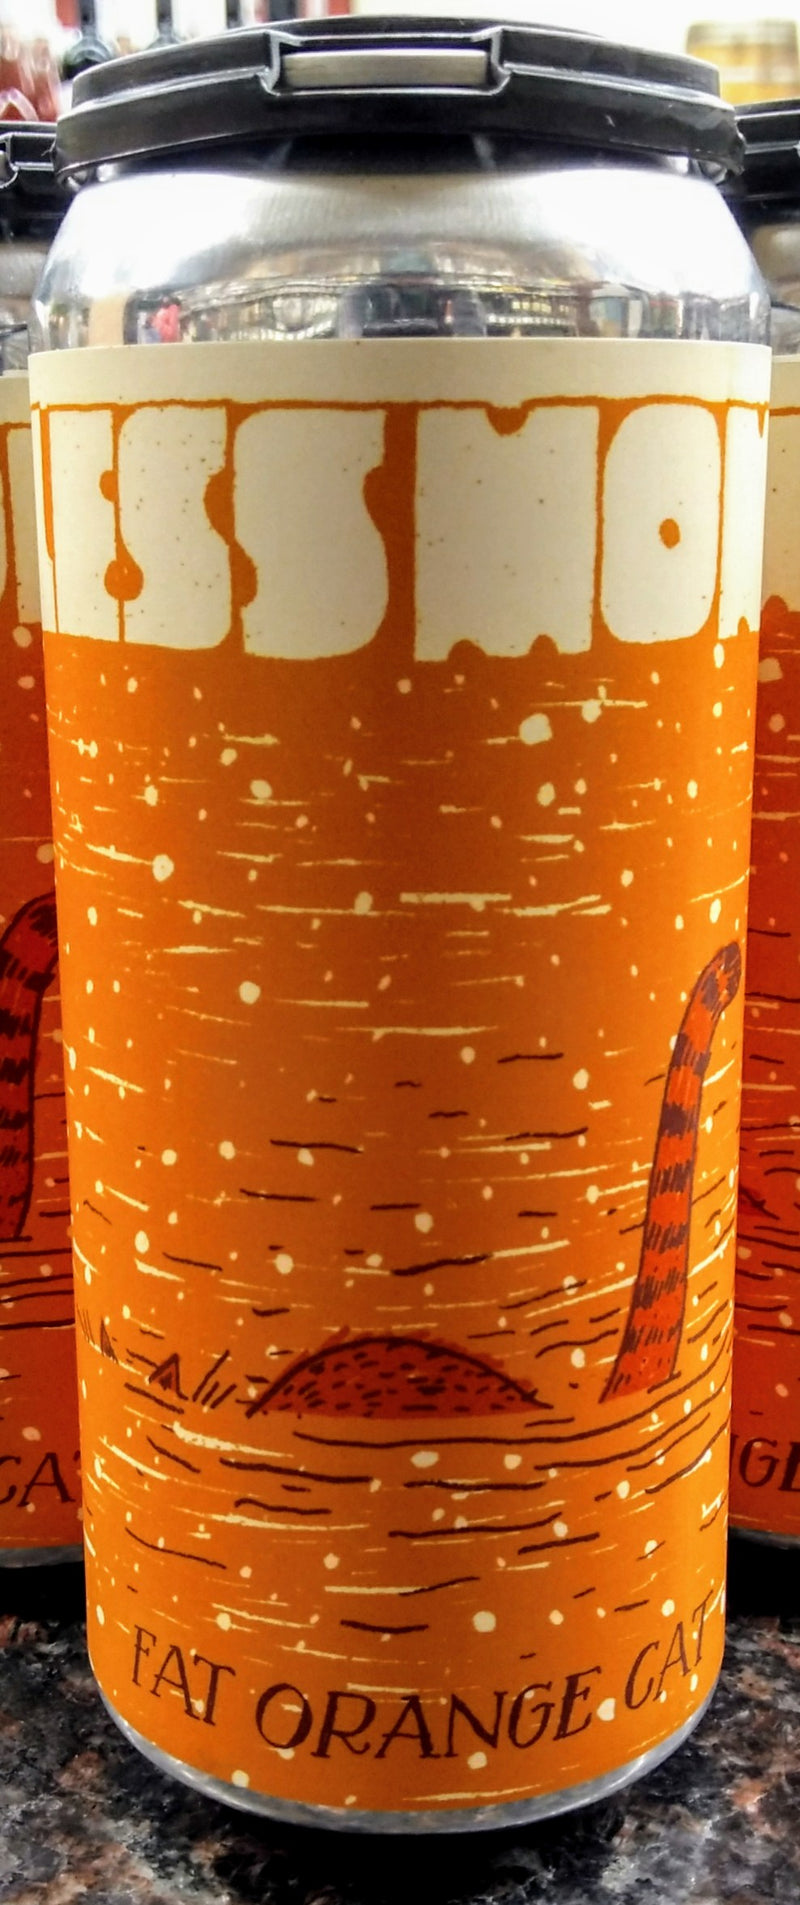 FAT ORANGE CAT BREWING CO. FOCLESS MONSTER NEW ENGLAND IPA 16oz can